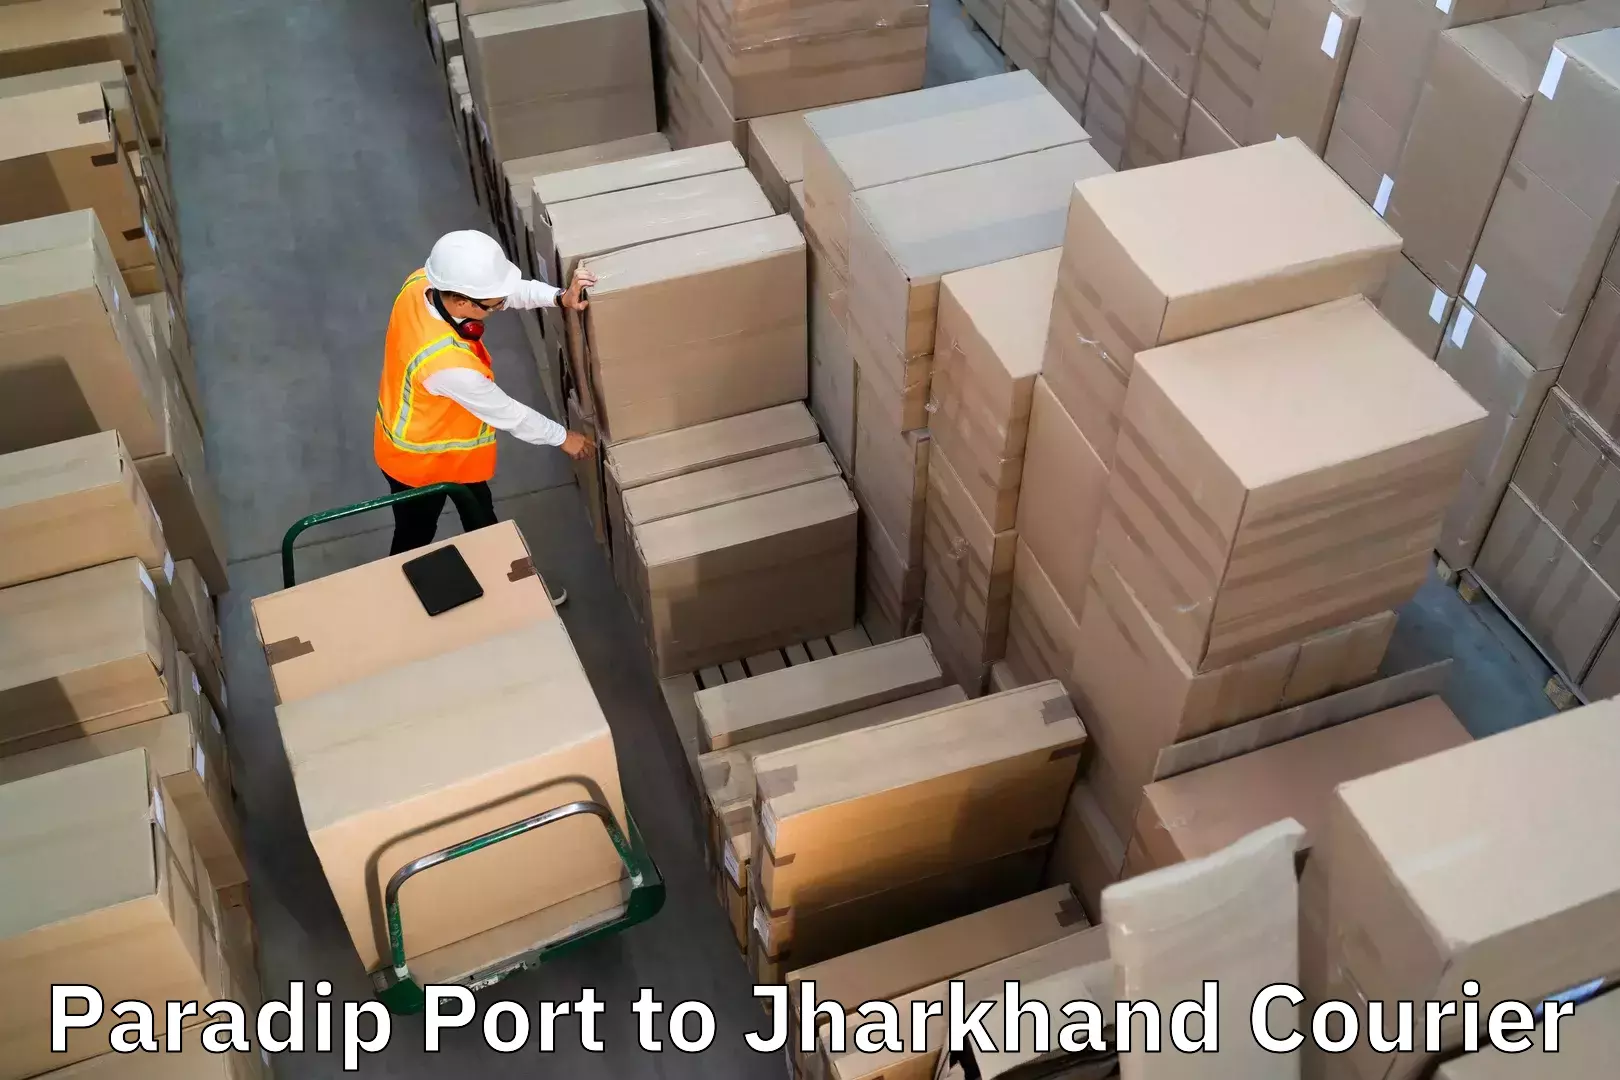 Luggage transfer service in Paradip Port to Deoghar